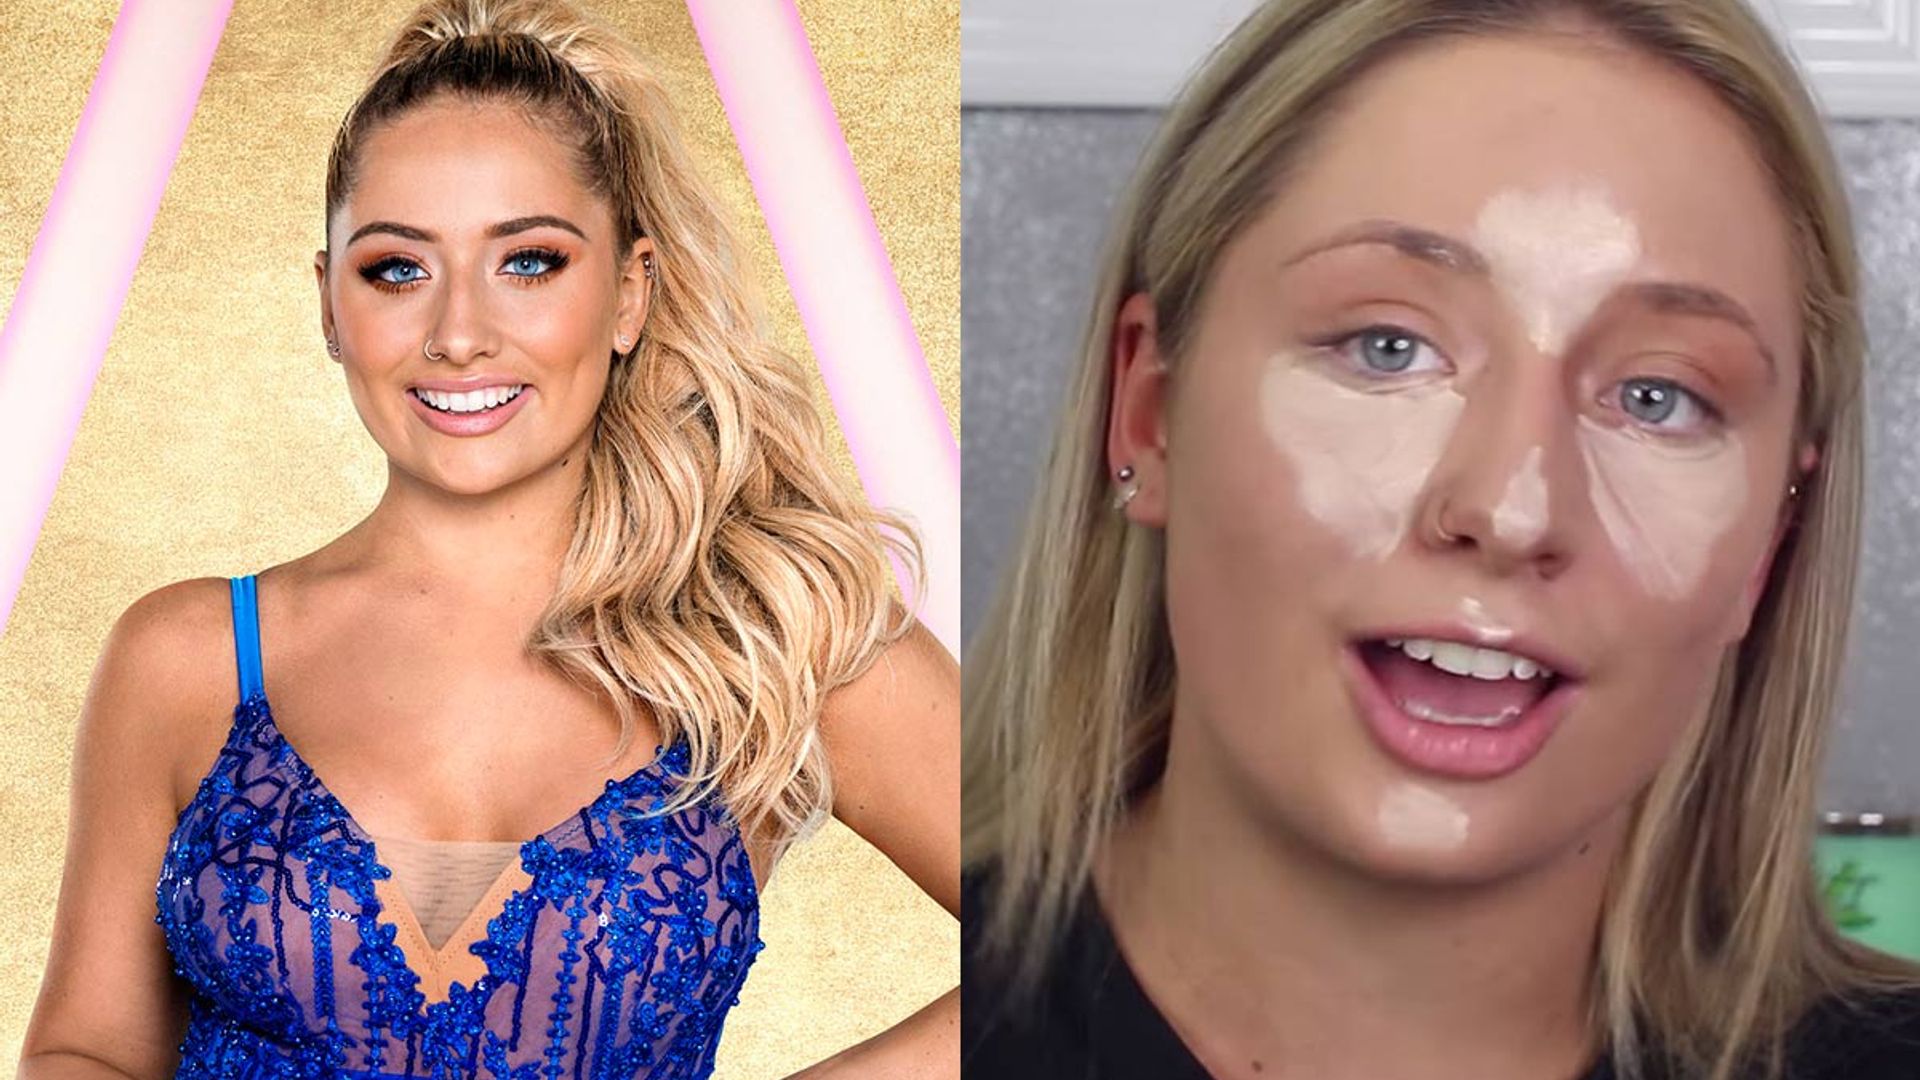 Saffron Barker swears by this £3.99 concealer for her daytime makeup look